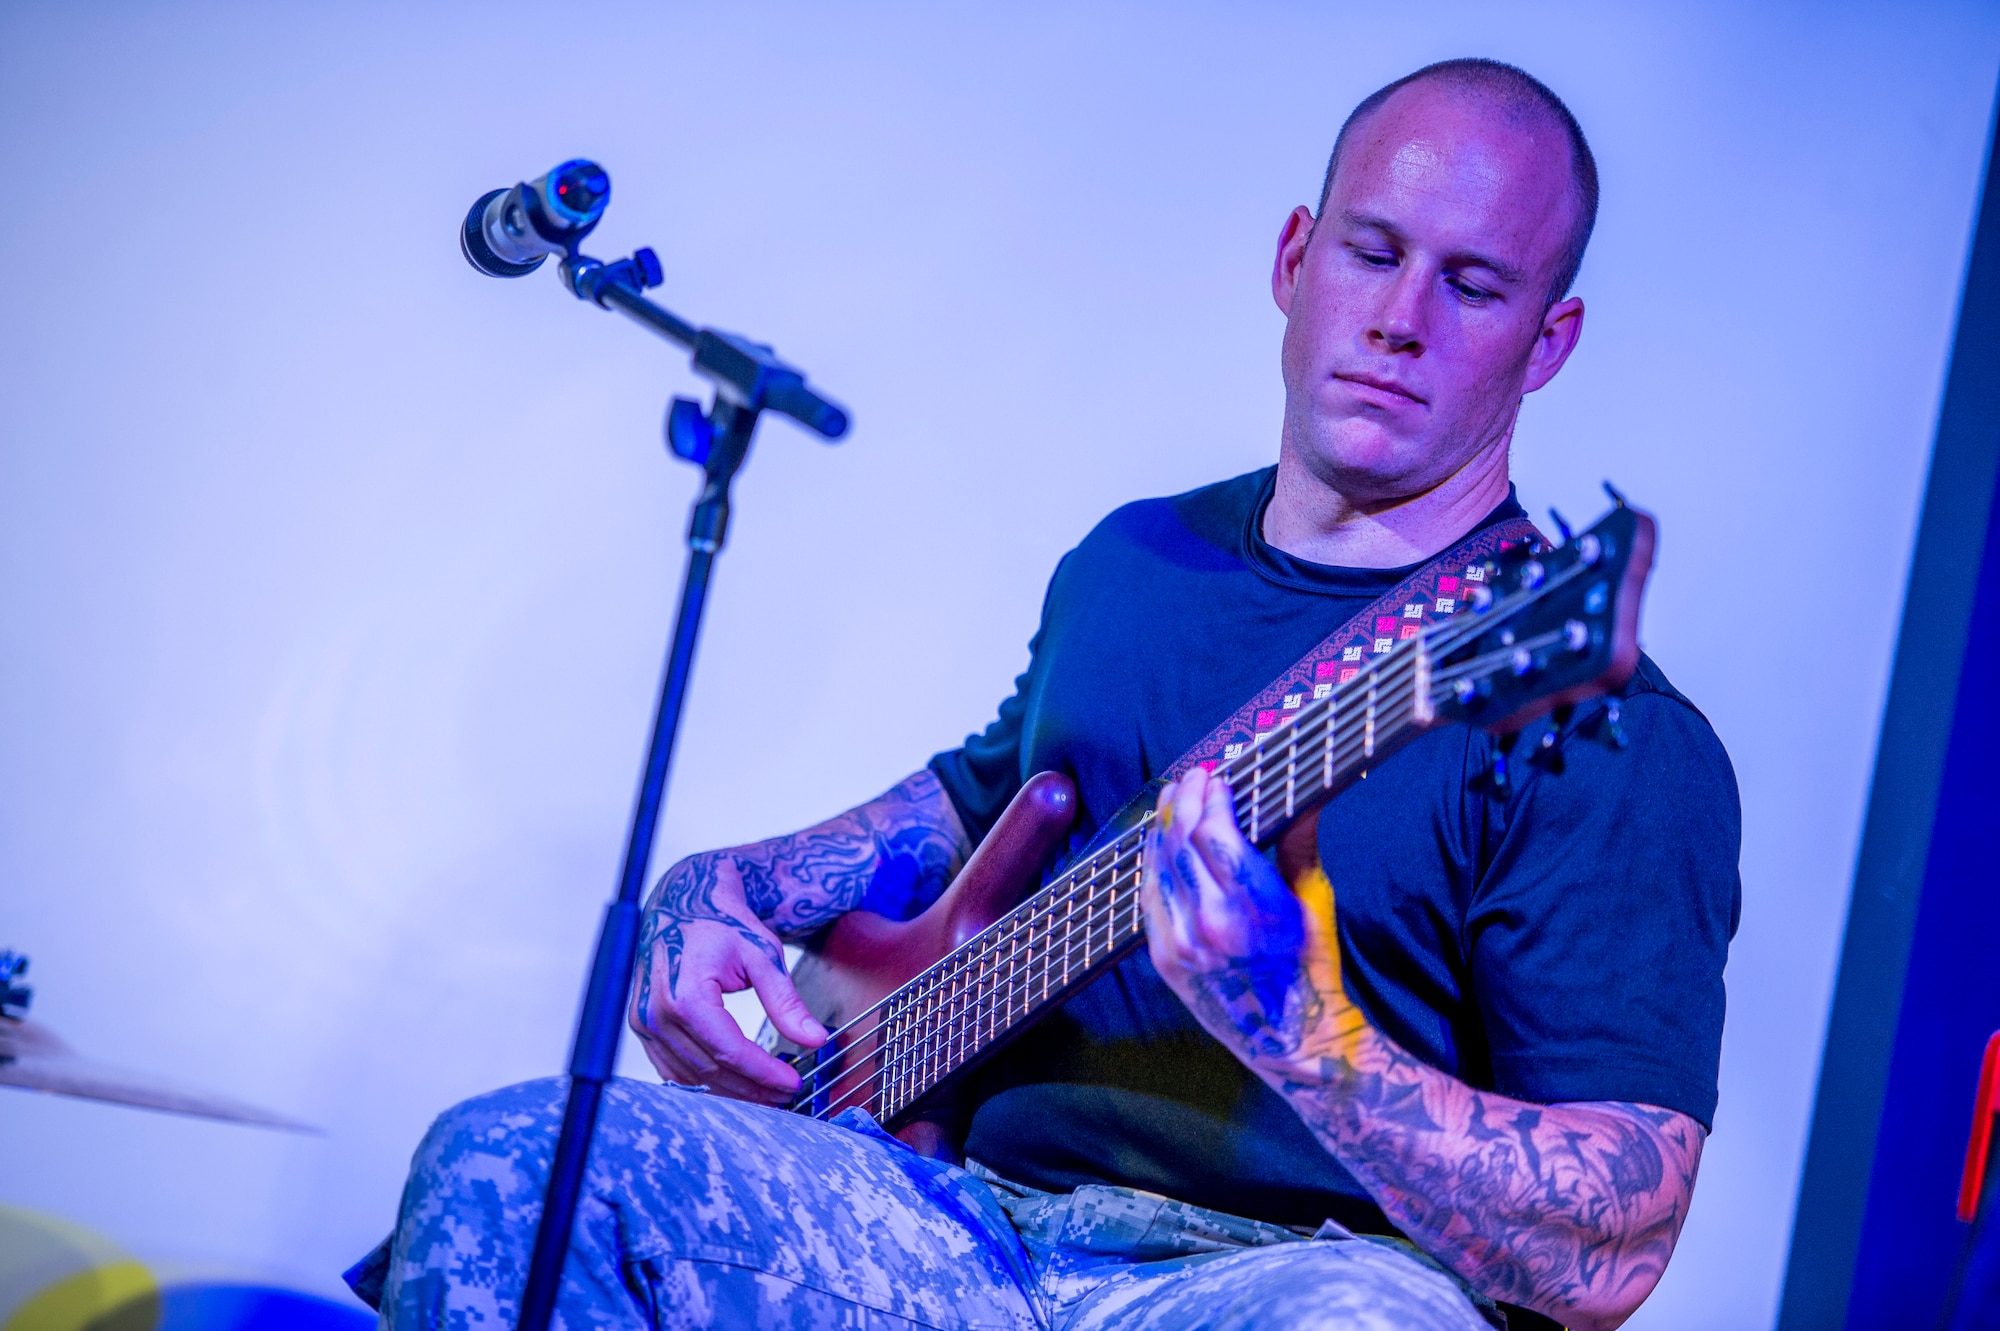 U.S. Army Sgt. Alex Womack, Loose Cannons bass guitarist, plays at the Drop Zone June 2, 2014 at an undisclosed location in Southwest Asia. The band deployed from Fort Bragg, North Carolina for a two week tour across the region performing for the troops in support of Operation Enduring Freedom. (U.S. Air Force photo by Staff Sgt. Jeremy Bowcock)